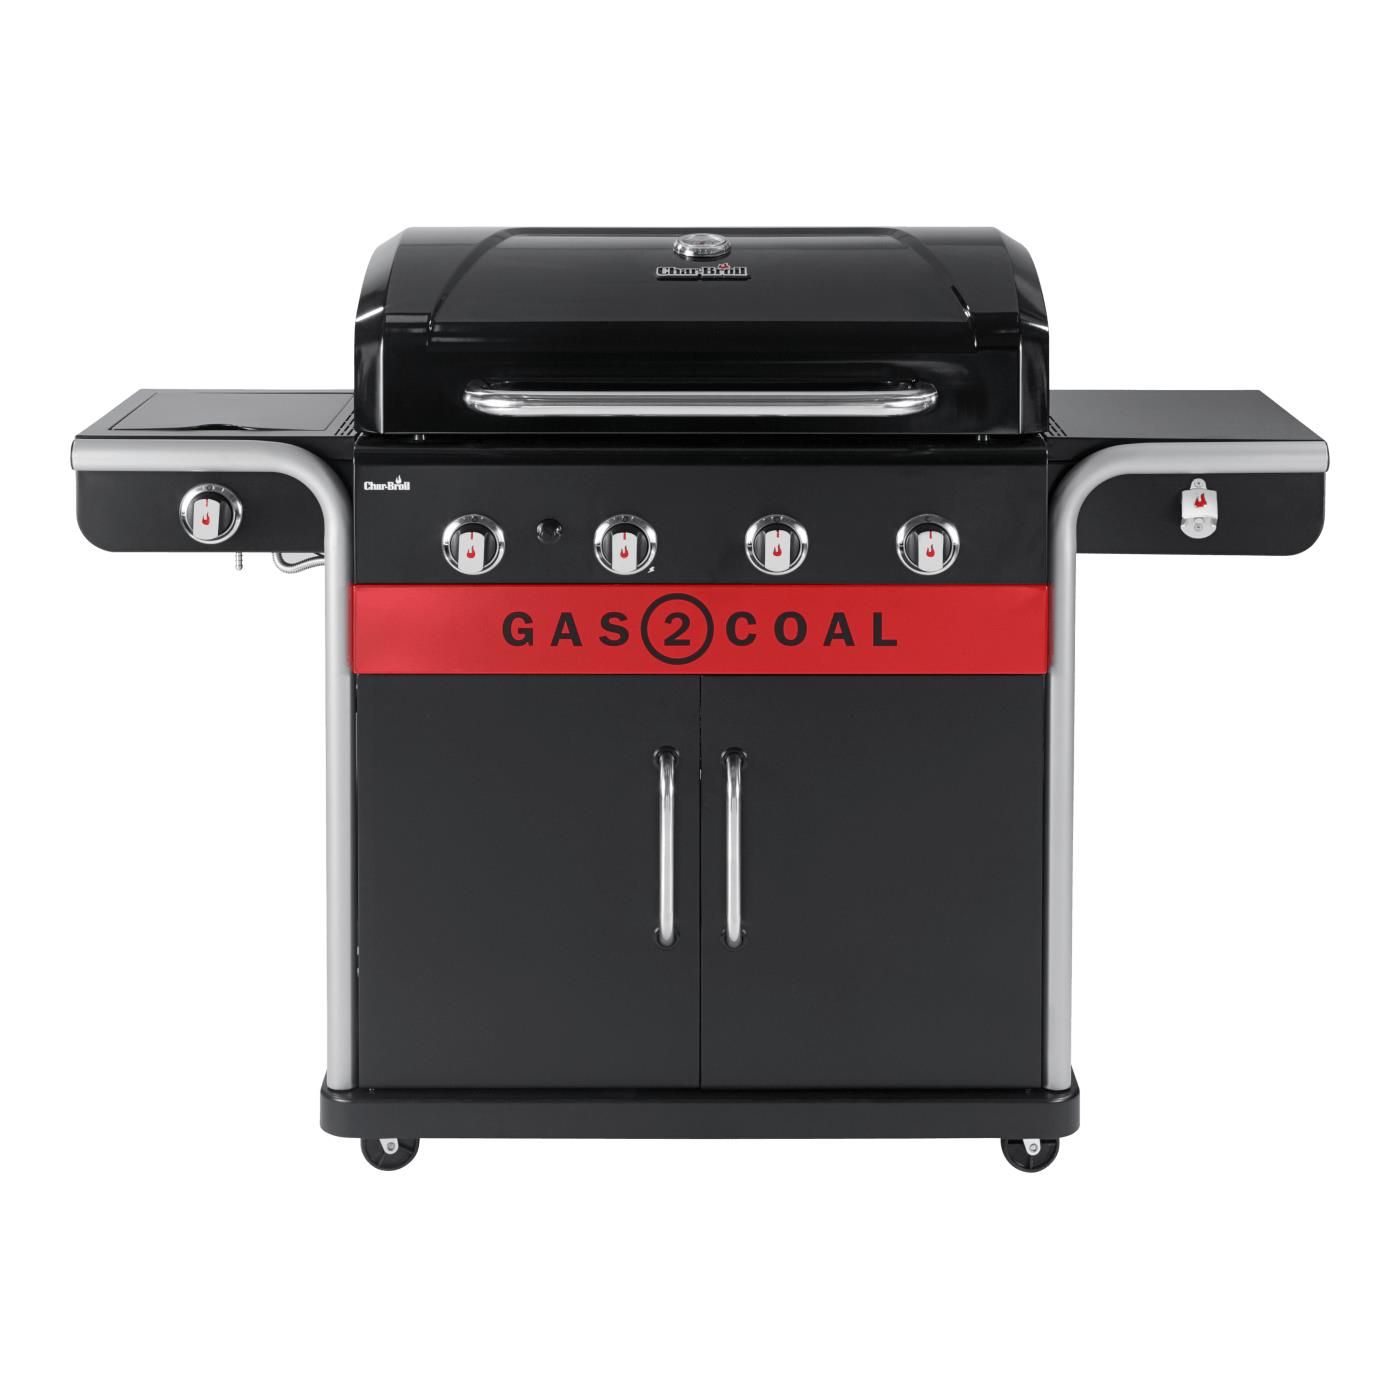 Char-Broil Barbecue A Gas